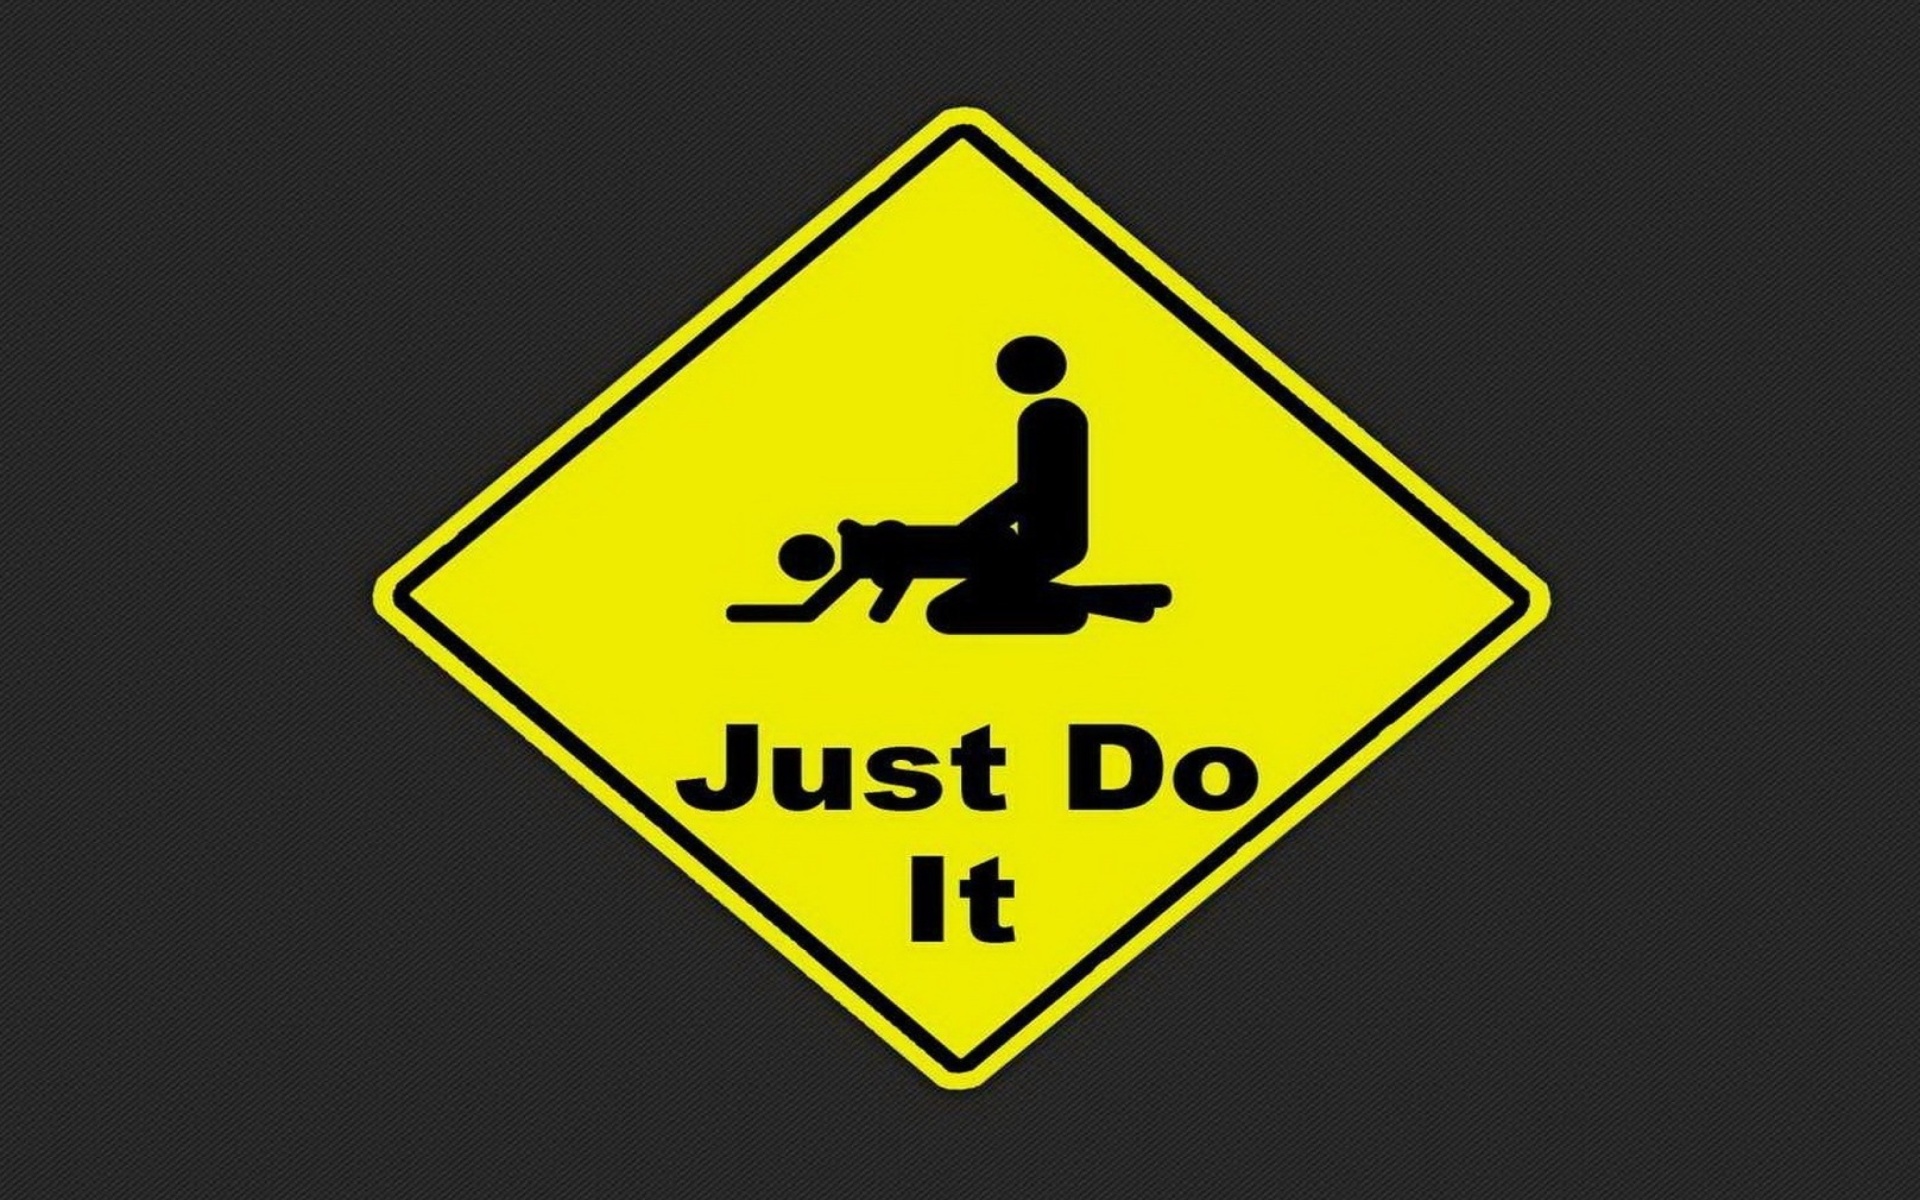 Das Just Do It Funny Sign Wallpaper 1920x1200